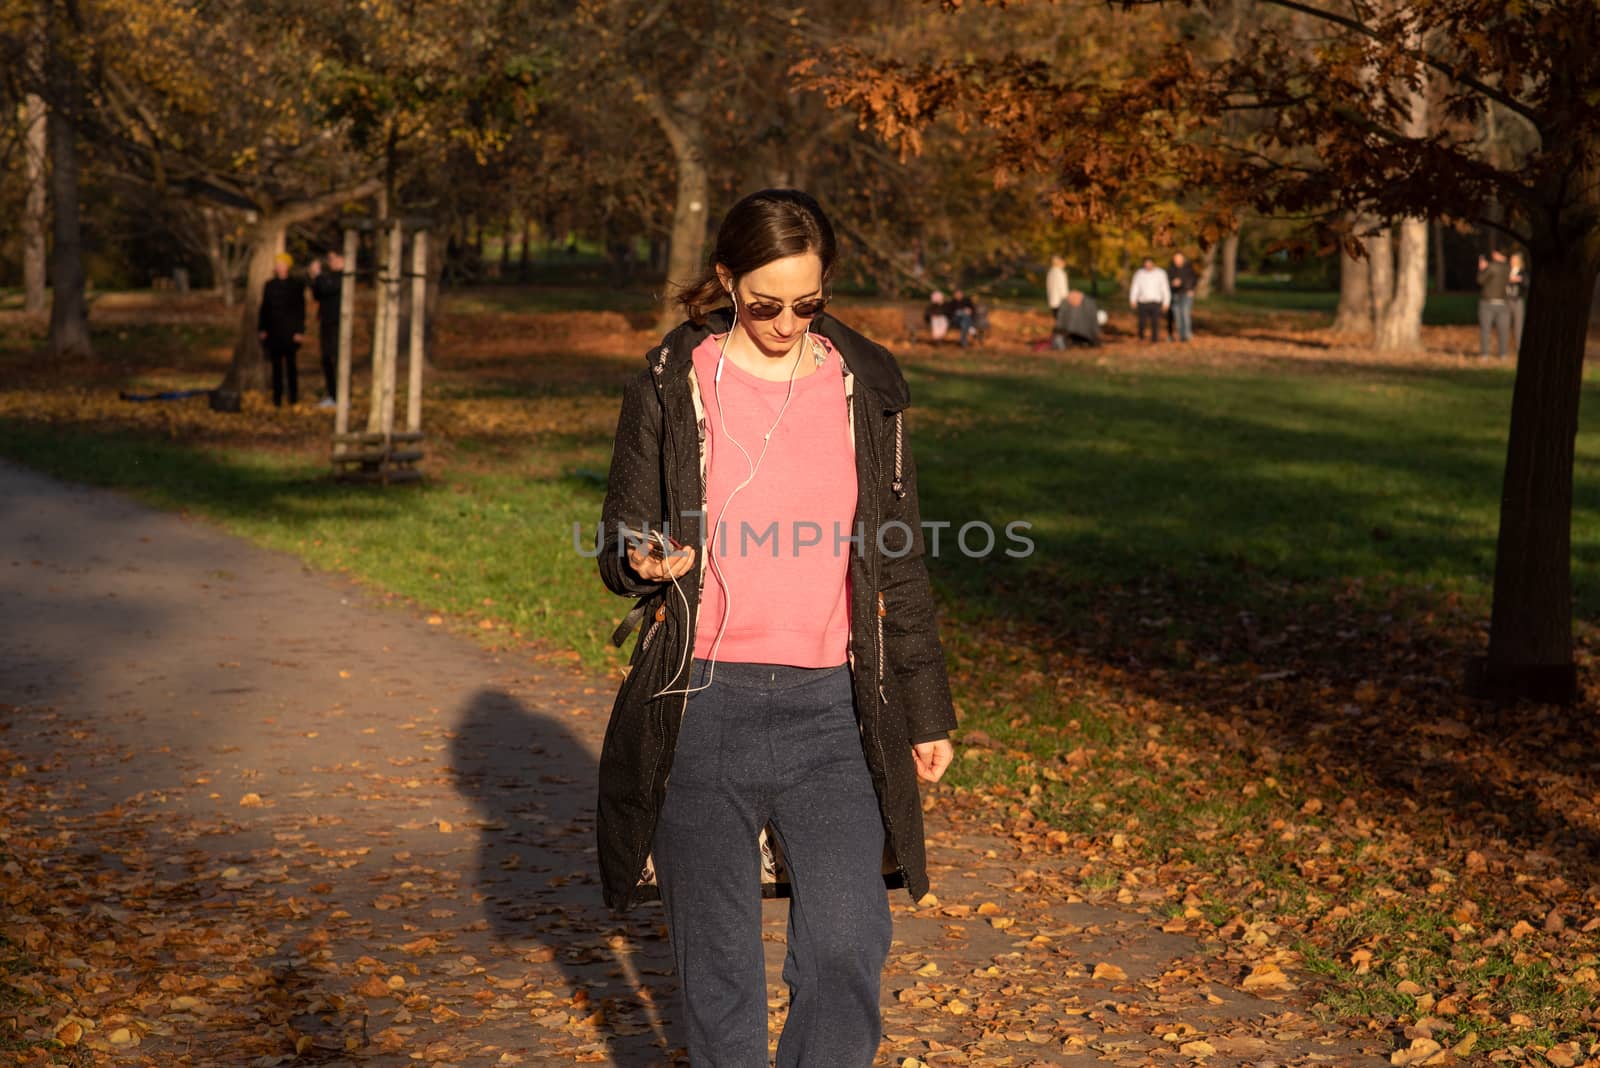 11/14/2020. Park Stromovka. Prague czech Republic. A woman is walking in the park on a Sunday winter day.